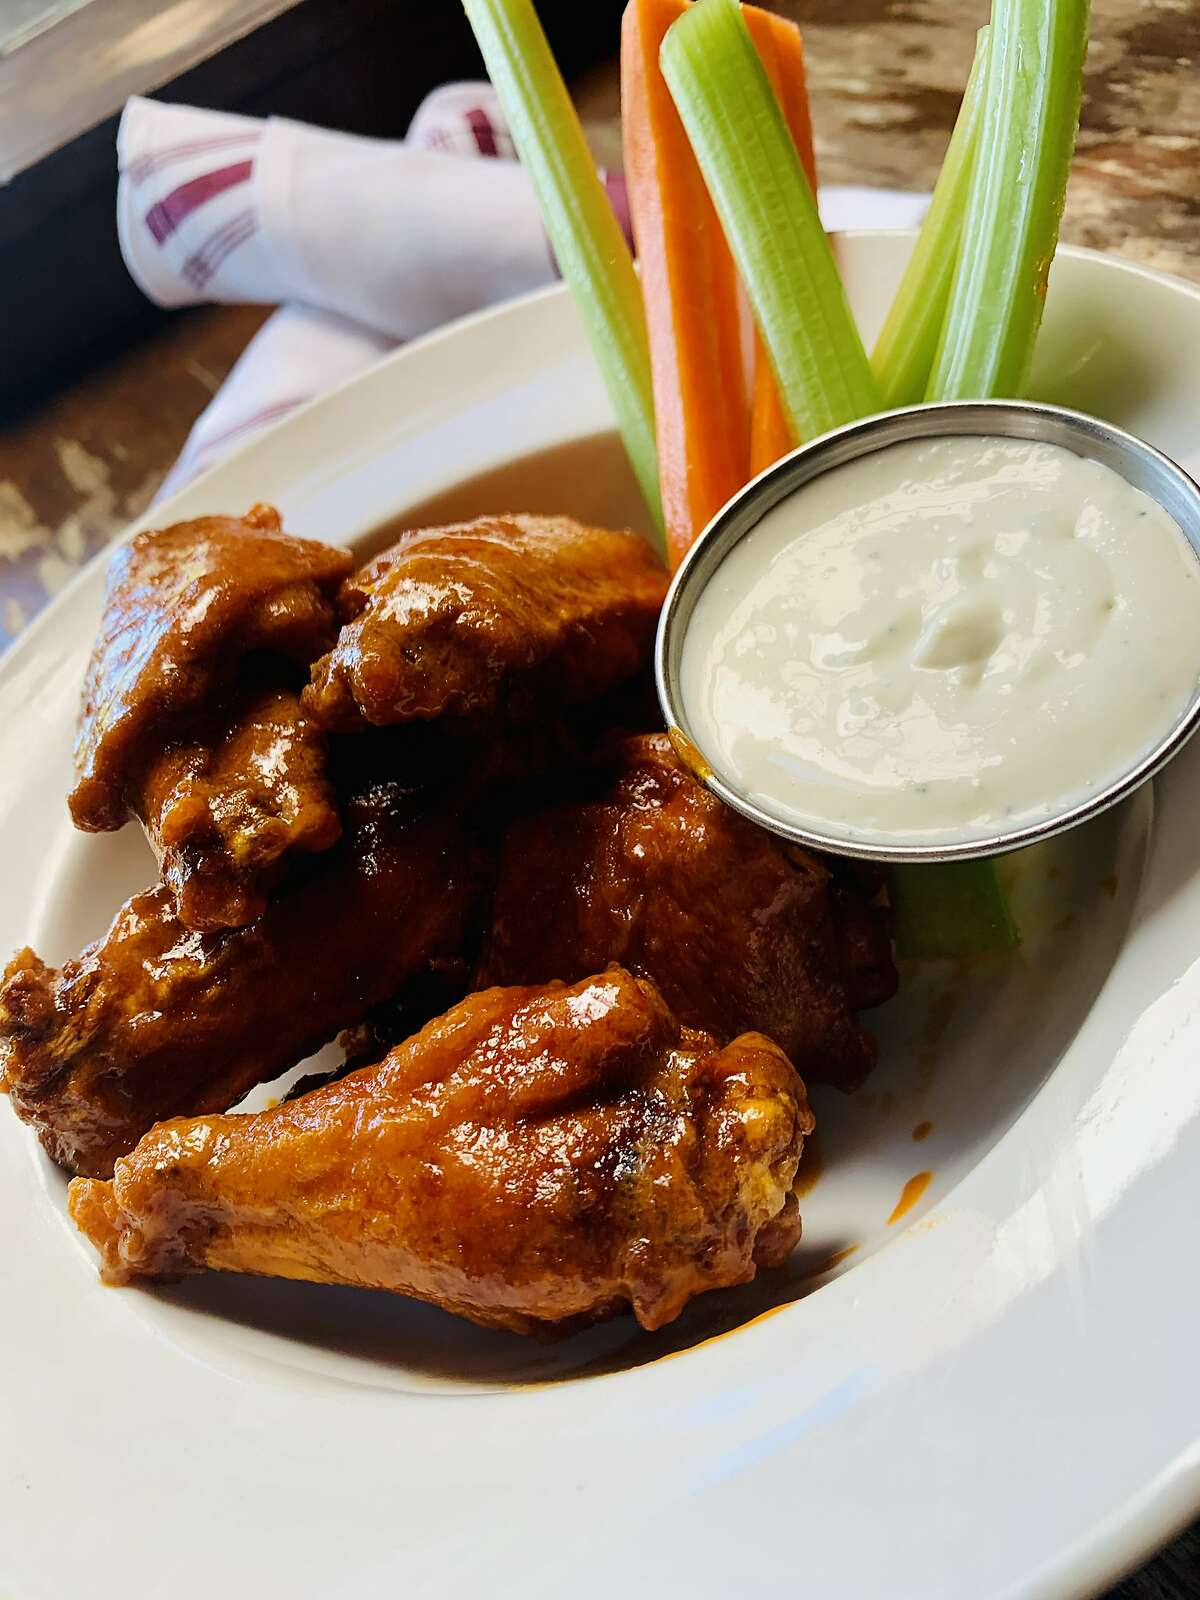 Buffalo chicken wings with blue cheese dressing from San Francisco restaurant Chao Pescao.